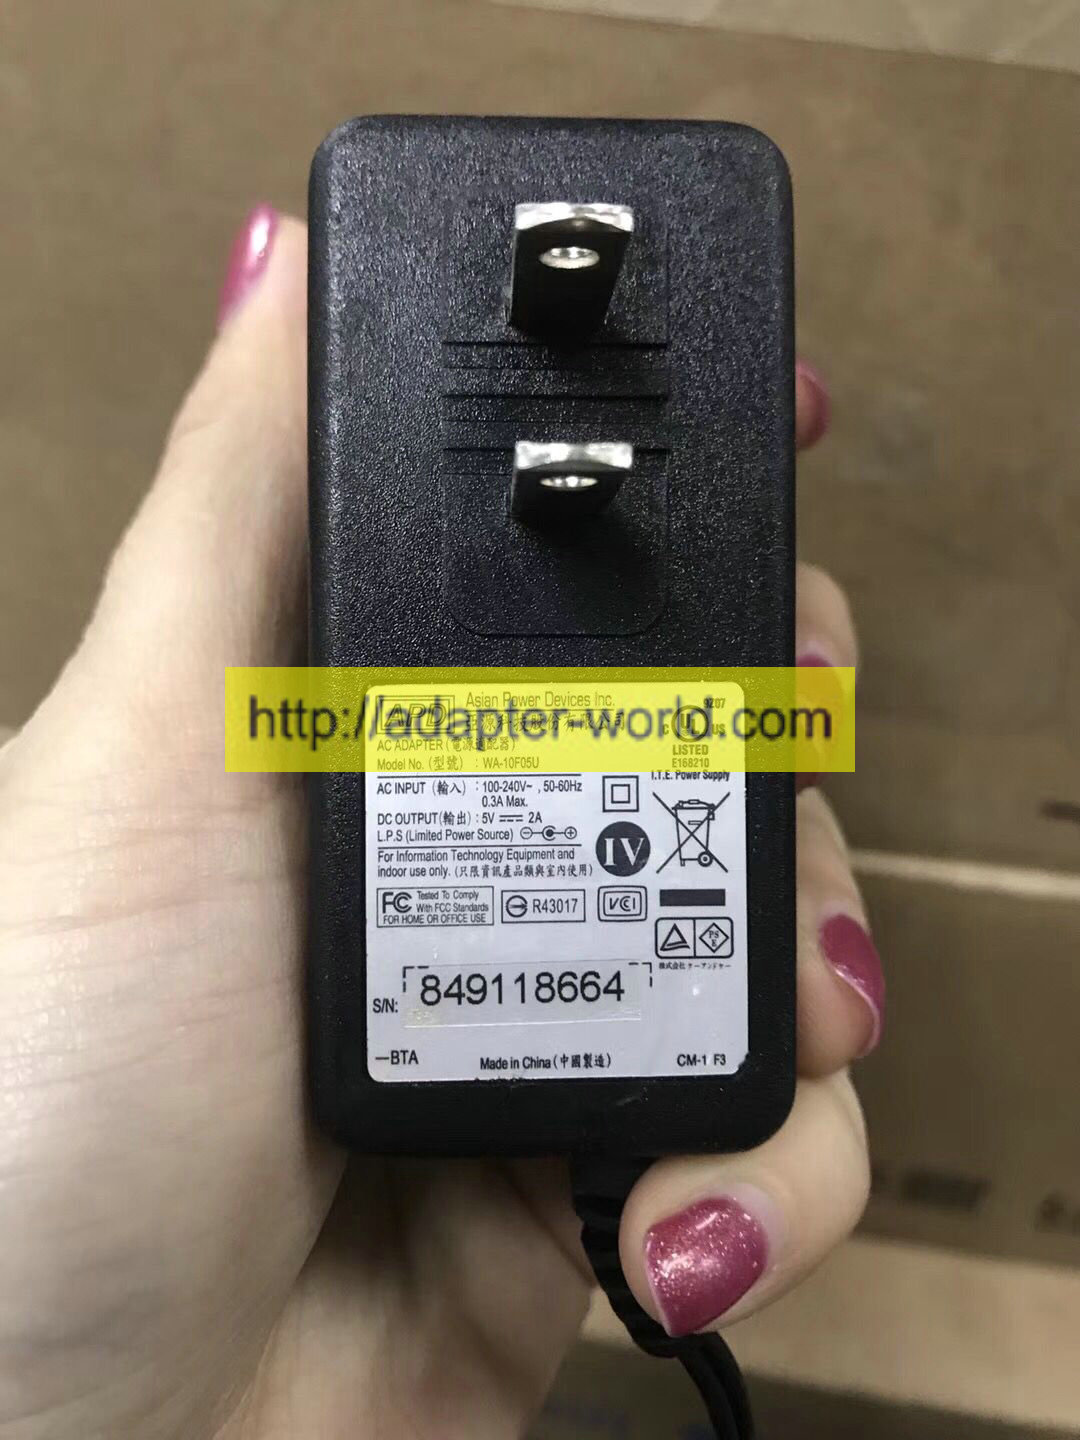 *100% Brand NEW* APD WA-10F05U 5V--2A 50-60Hz 0.3A Max AC ADAPTER Power Adapter Free shipping!